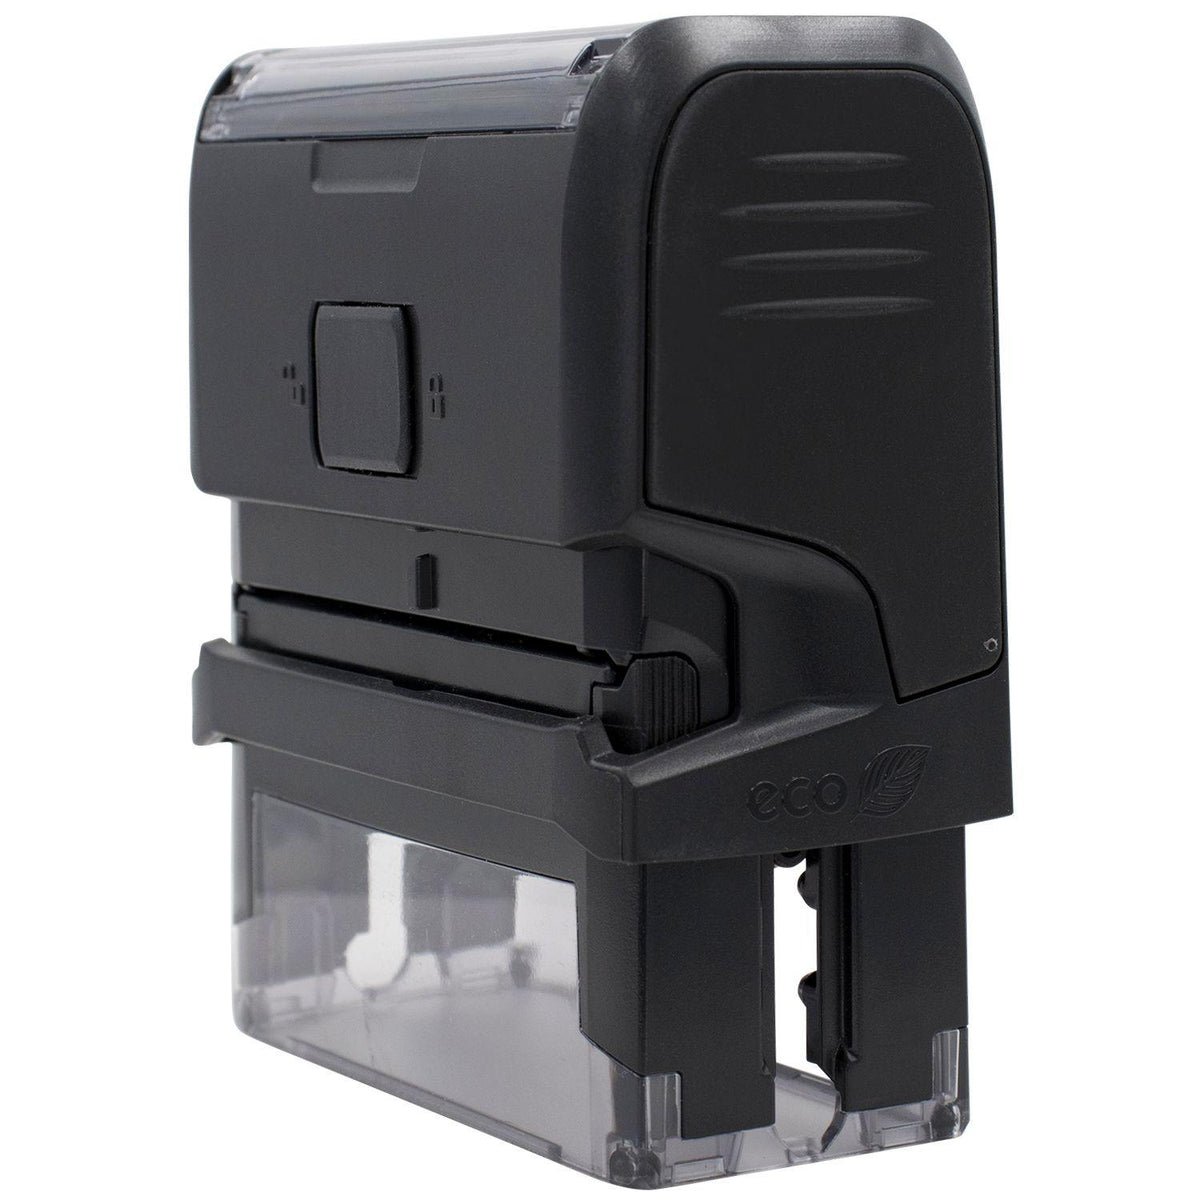 Side View of Large Self Inking Cancelled Stamp at an Angle